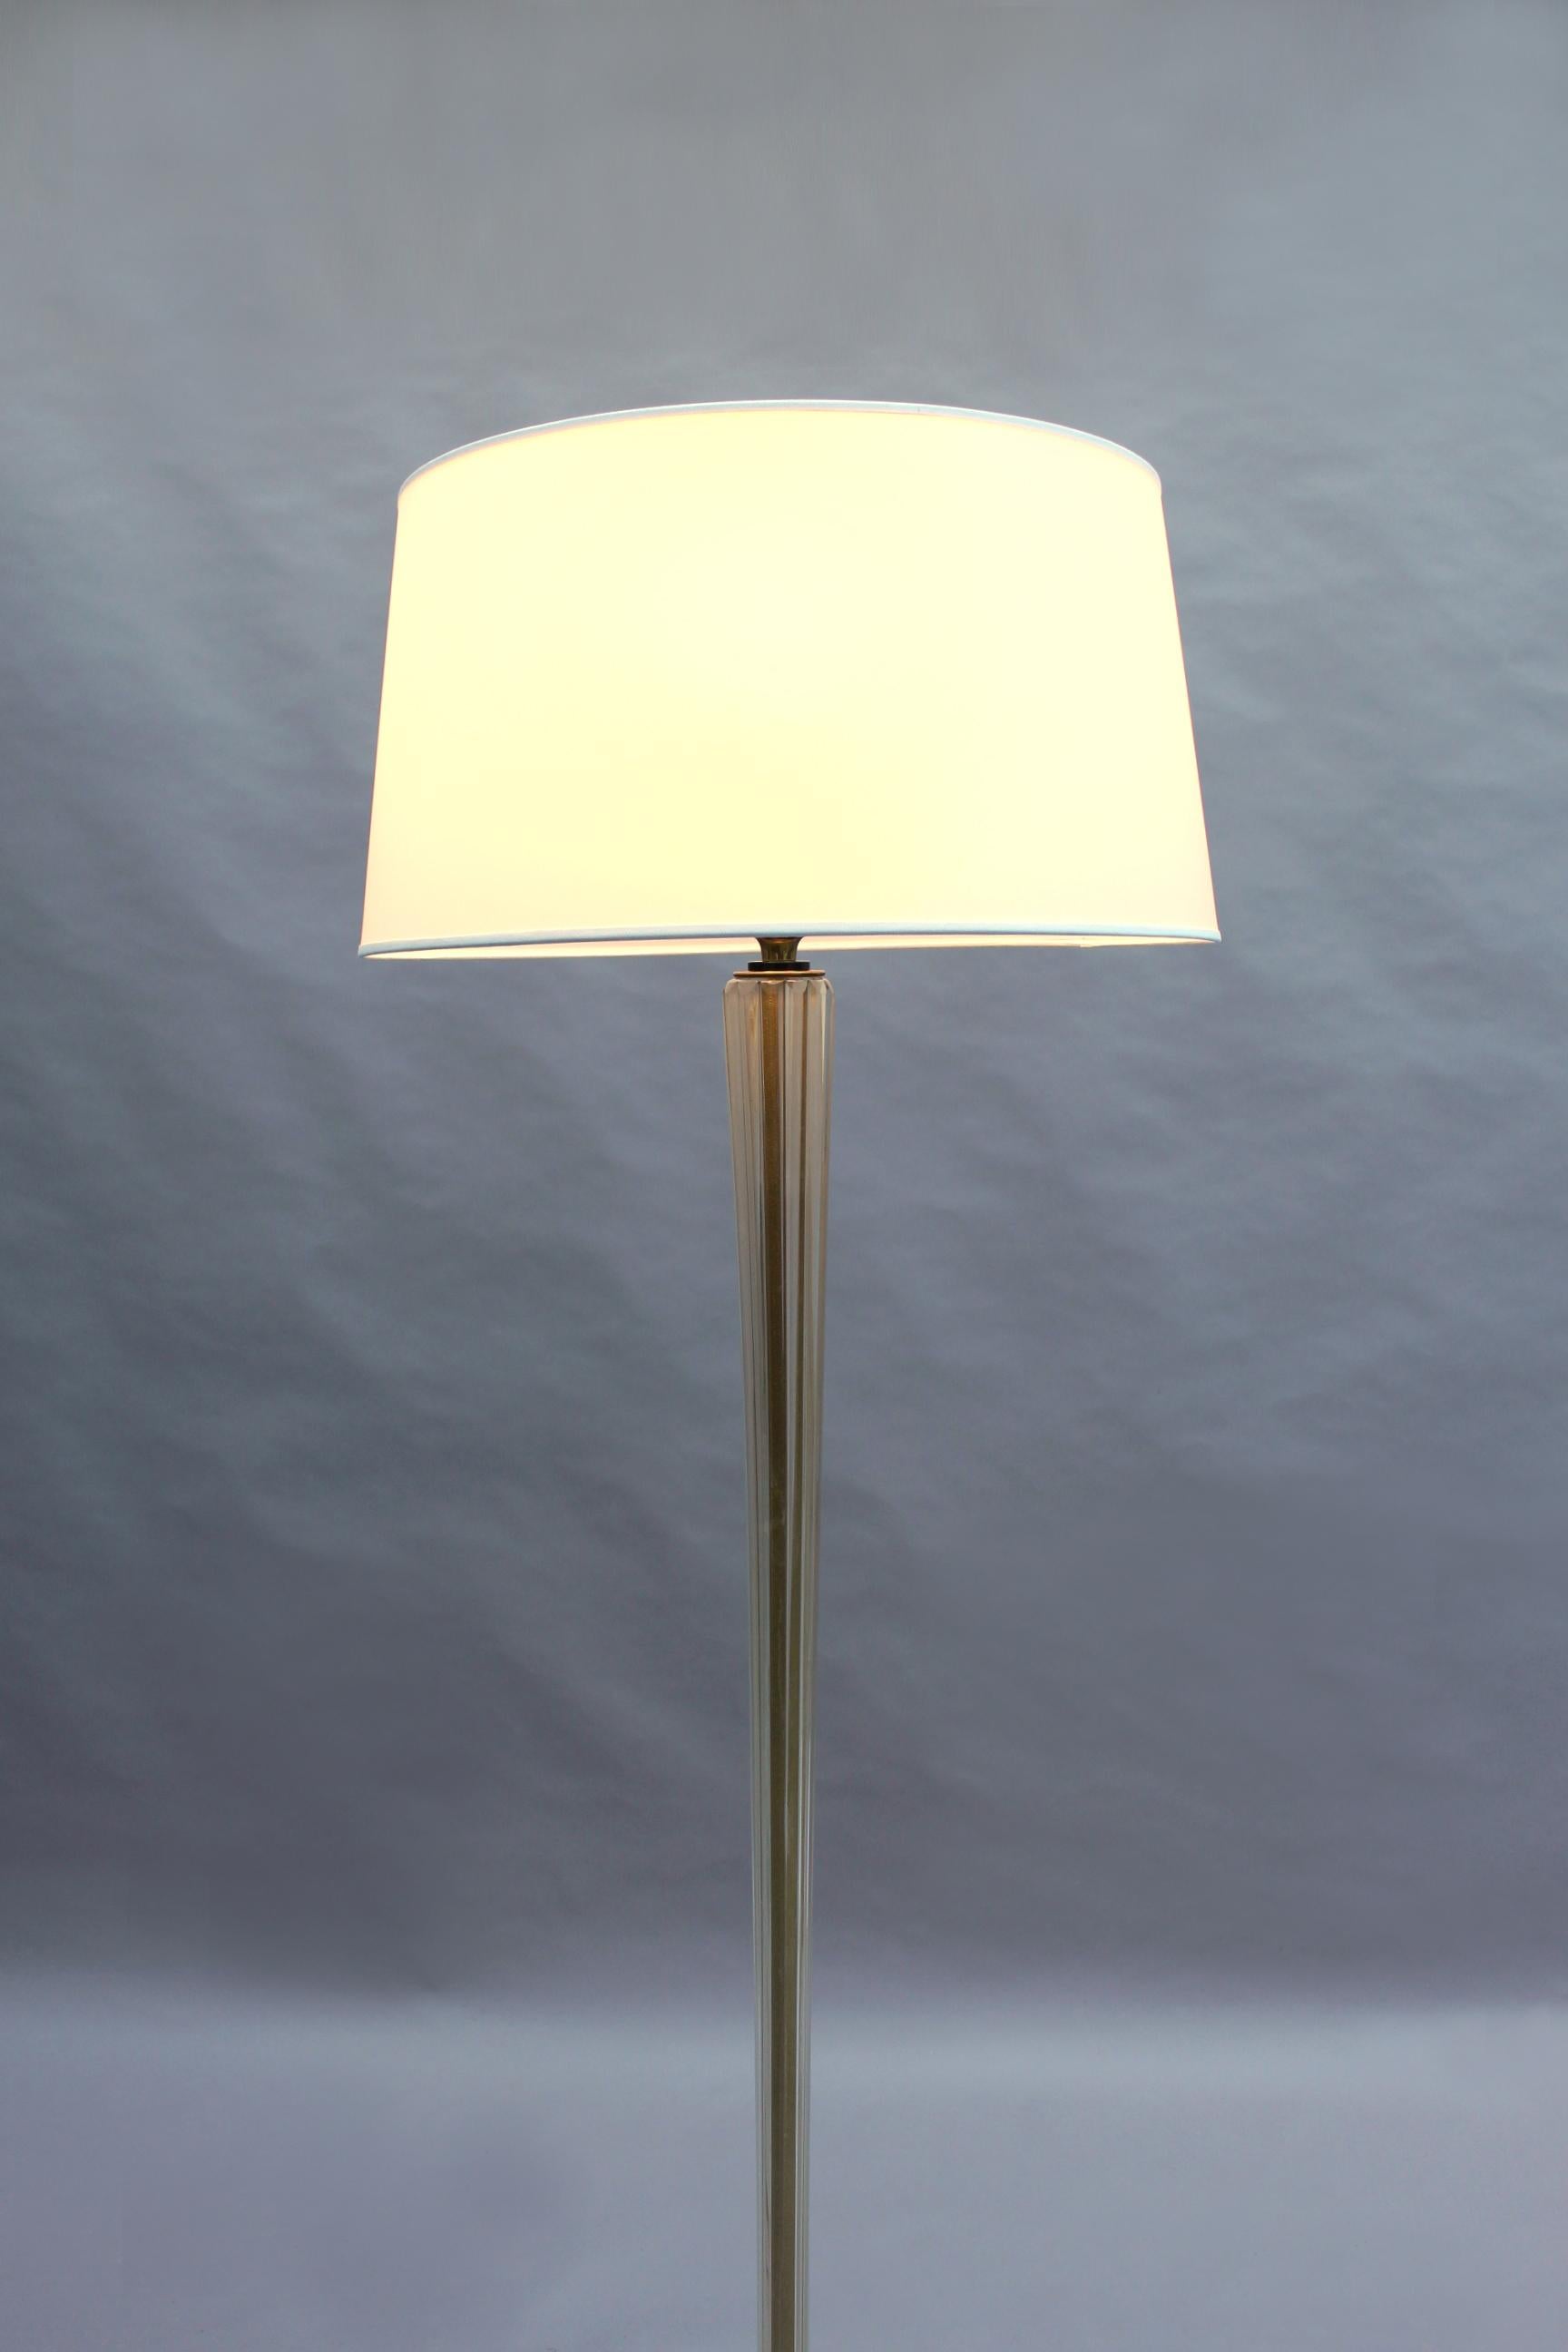 Fine French Art Deco Glass and Bronze Floor Lamp In Good Condition For Sale In Long Island City, NY